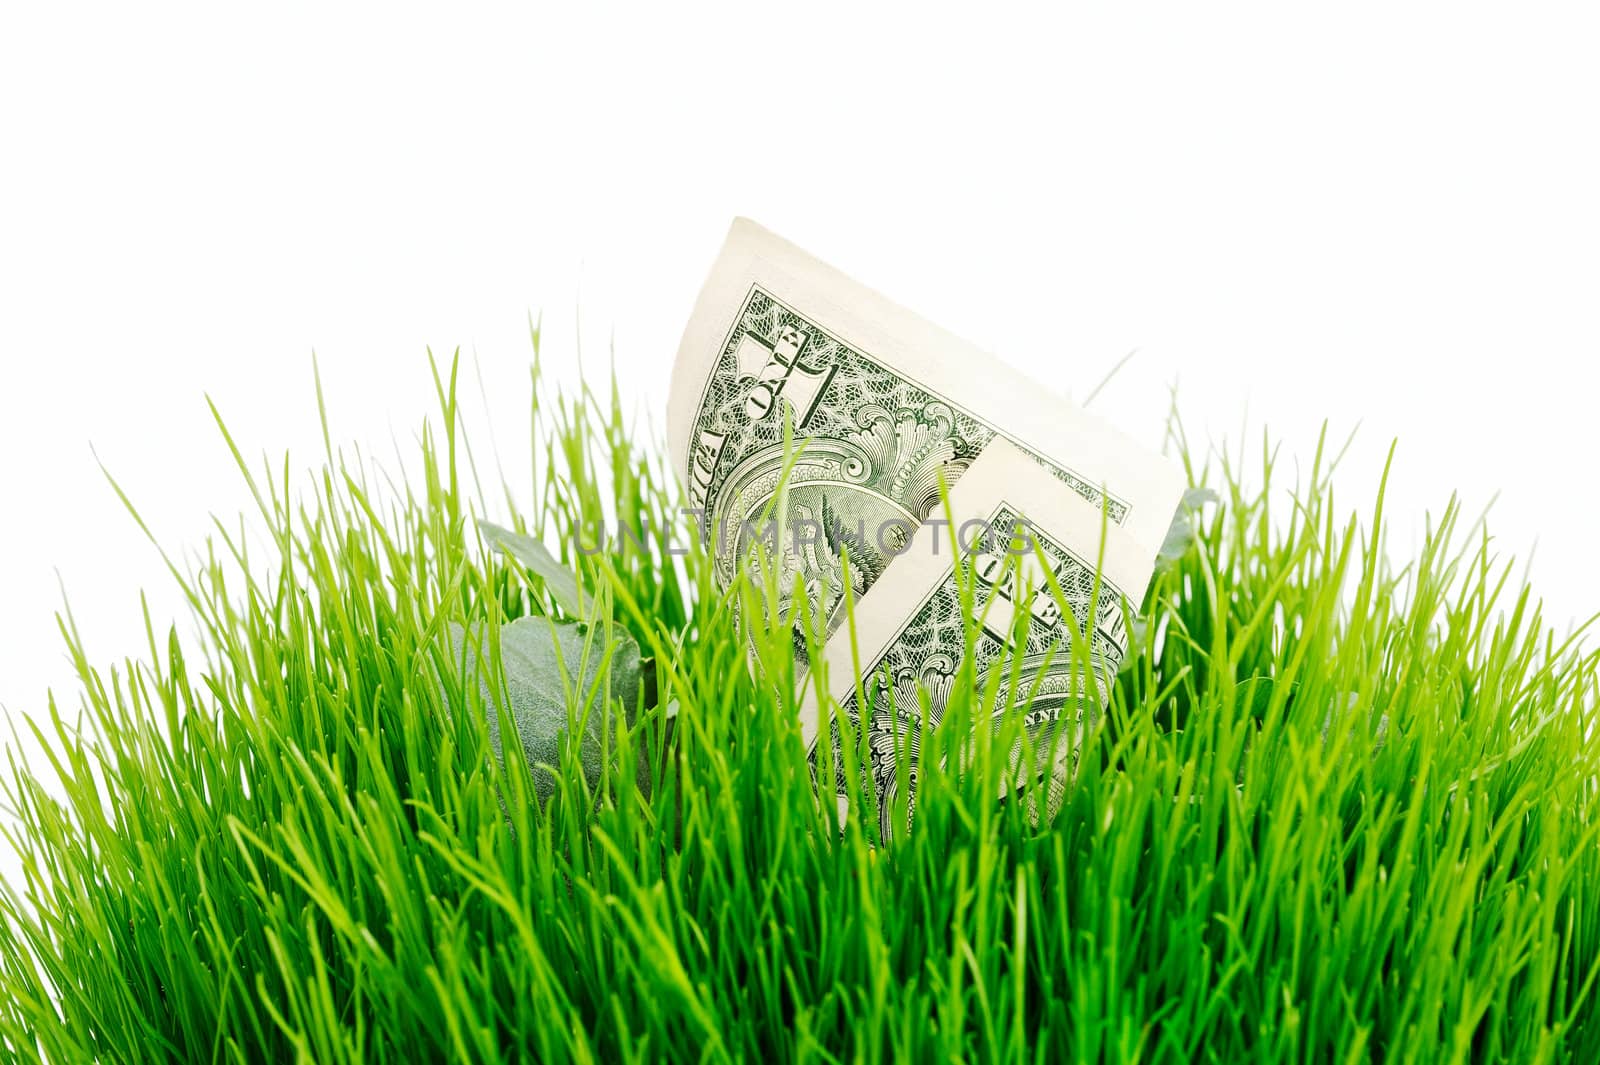 In the long green grass place banknote